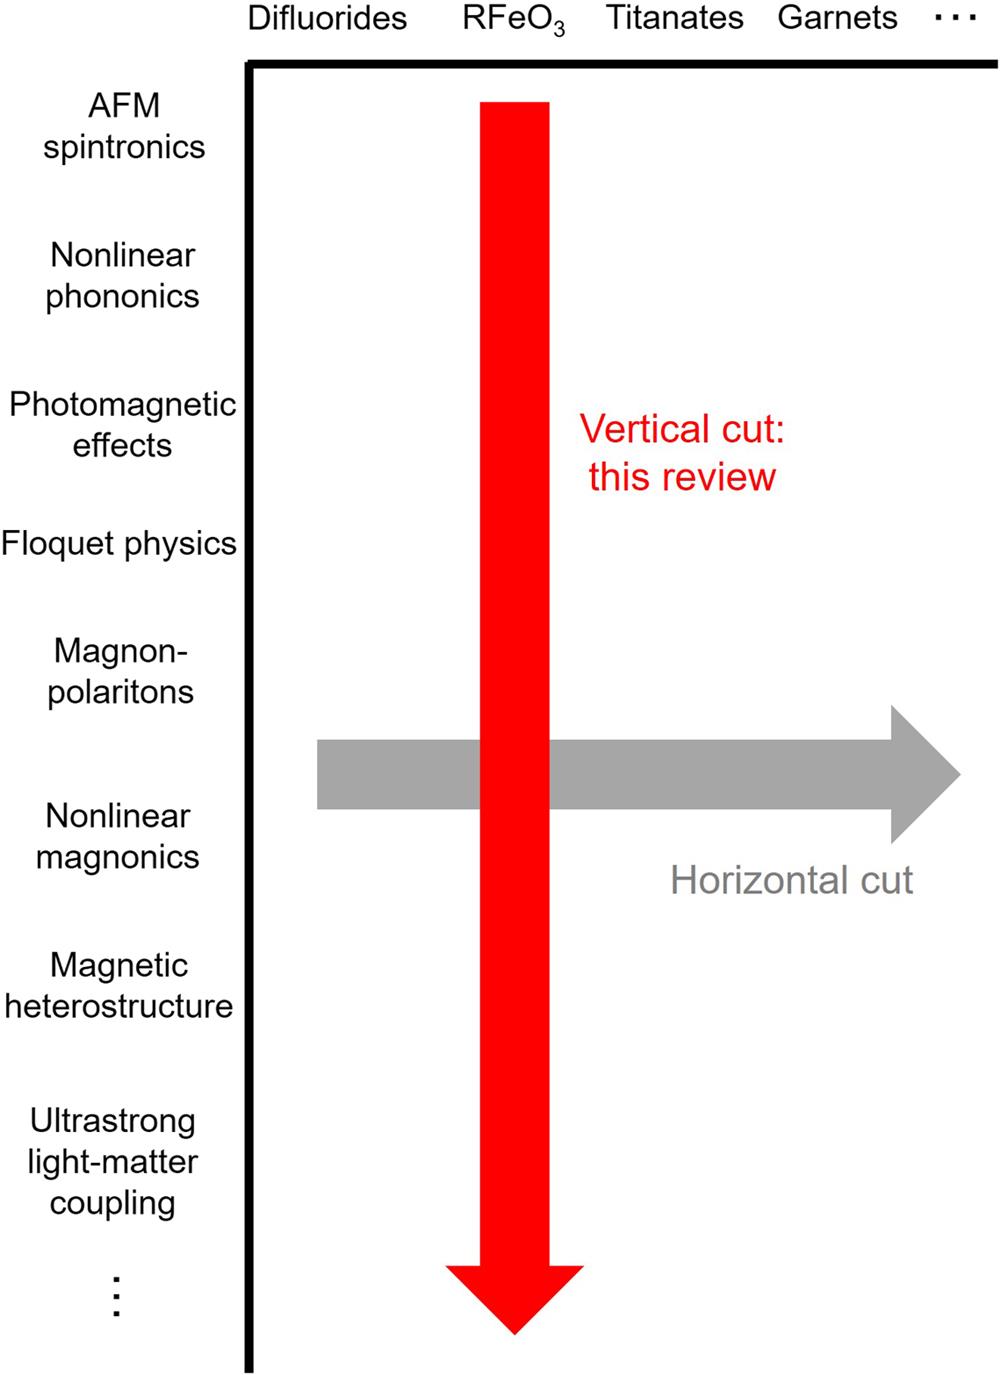 “Phase space” for review articles in spintronics, spanned by the horizontal axis of materials and vertical axis of novel physical phenomena. The current review represents a vertical cut in the phase space.